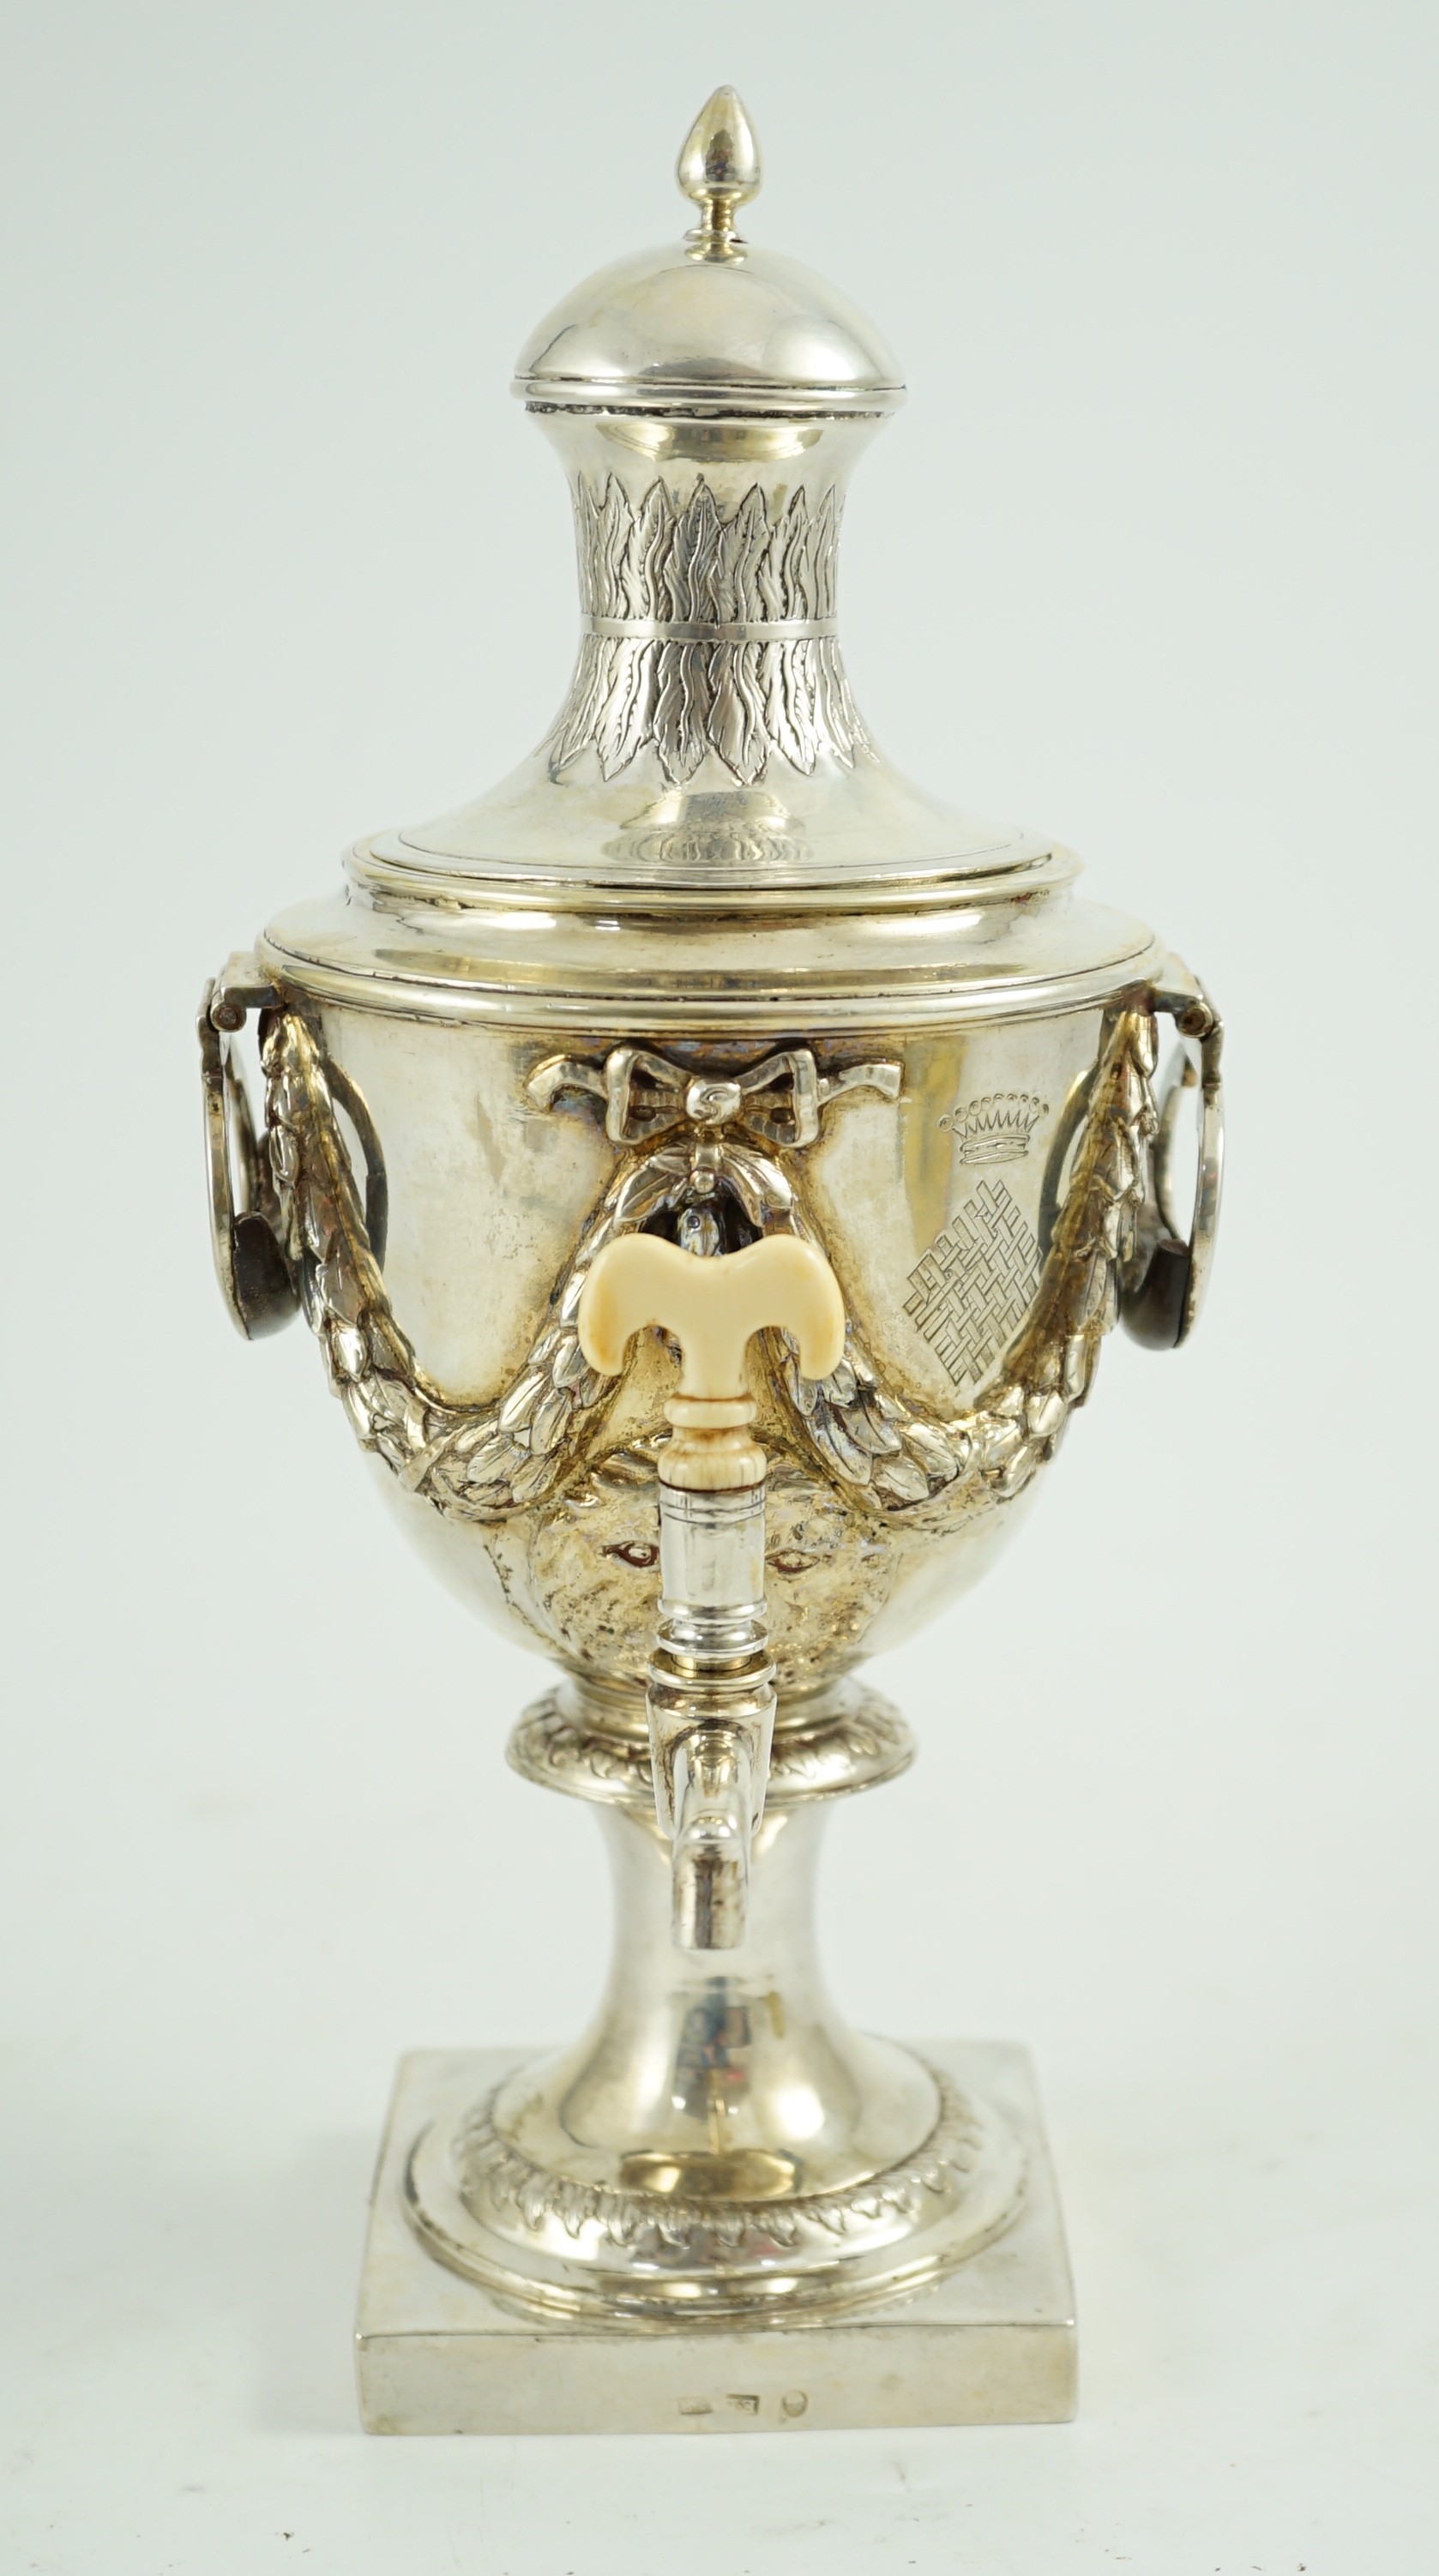 A late 18th century Russian silver samovar, with ivory spigot, master possibly Alexander Yarshinov?